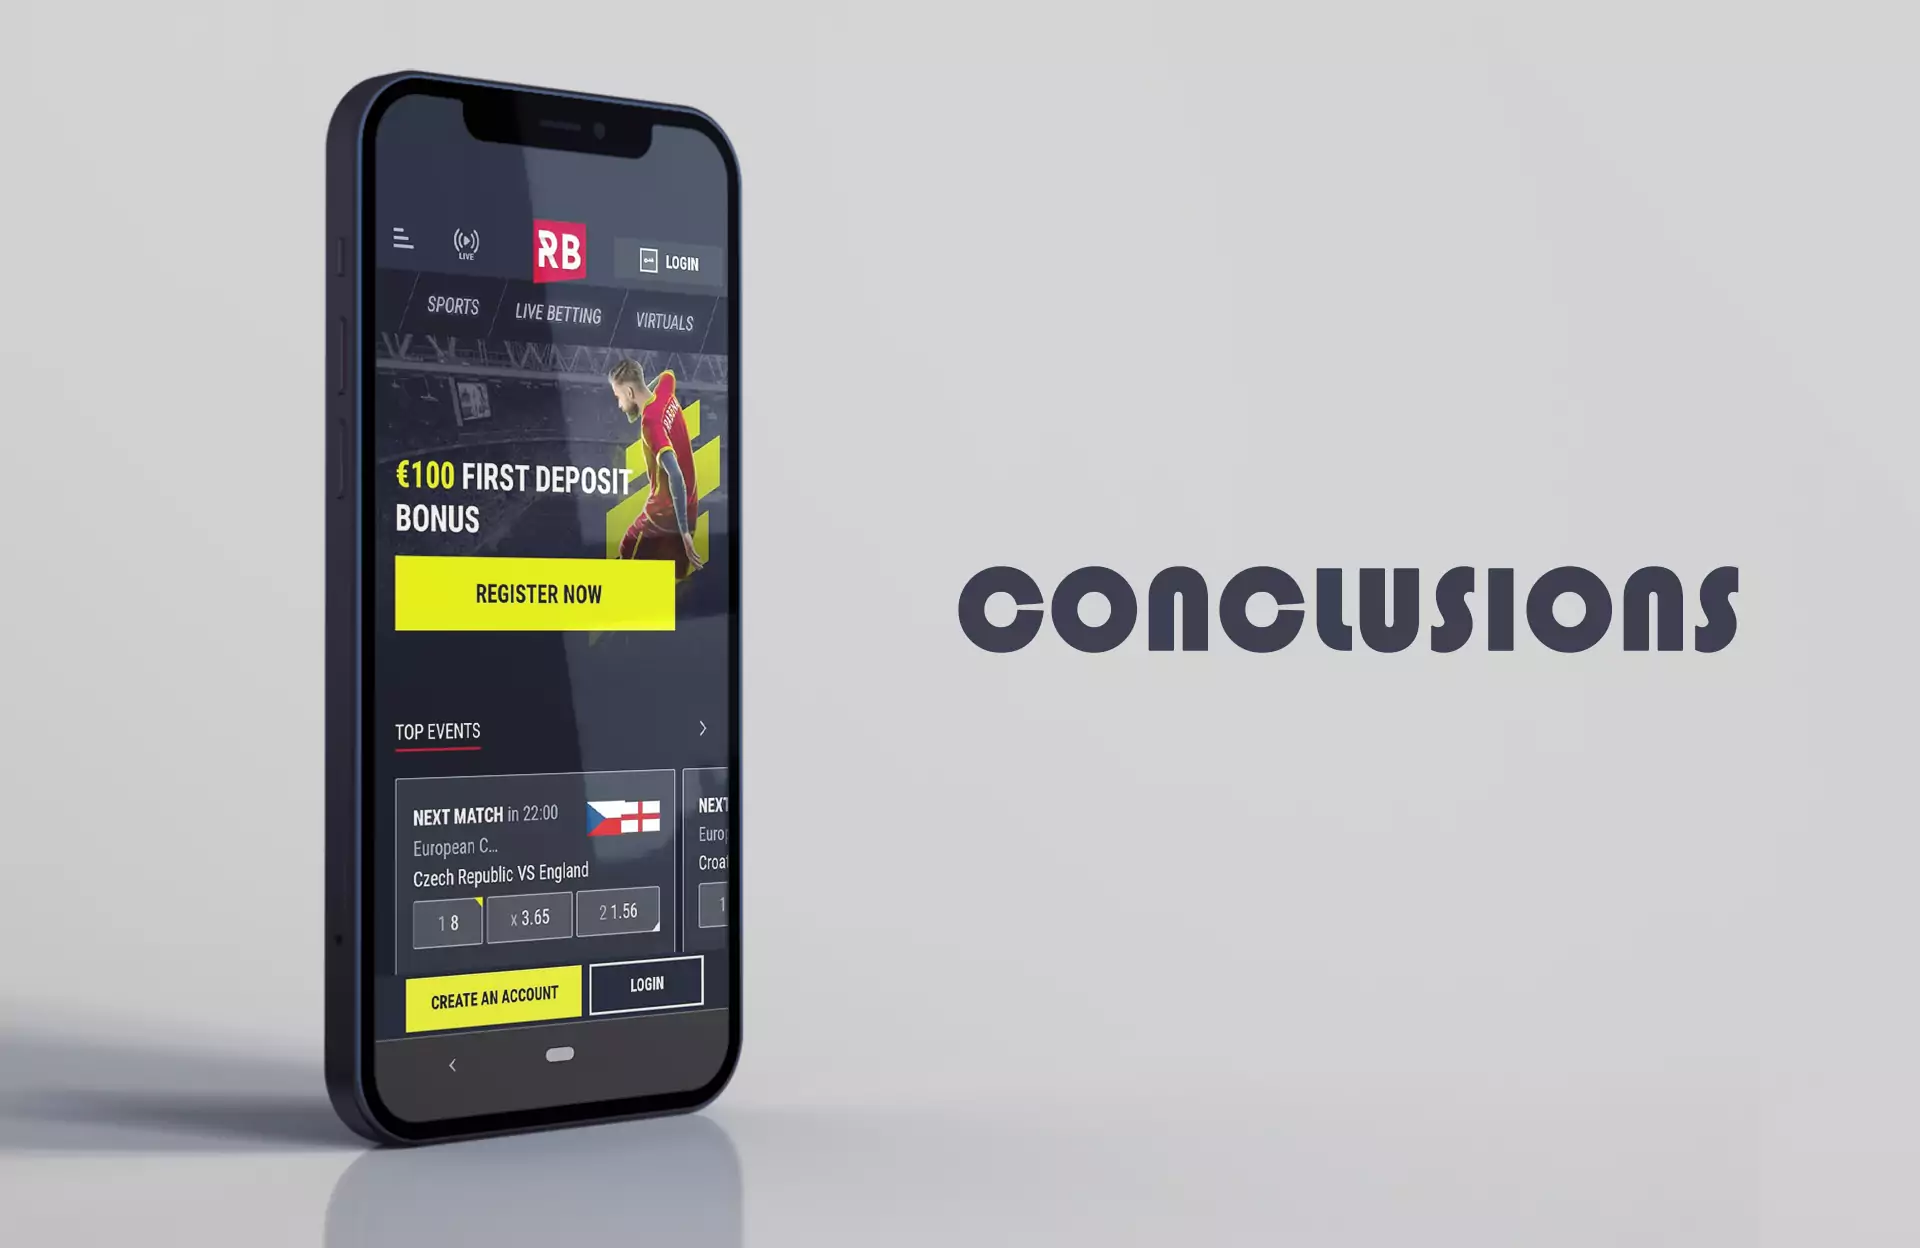 Read about the main benefits of the Rabona app in our conclusions.